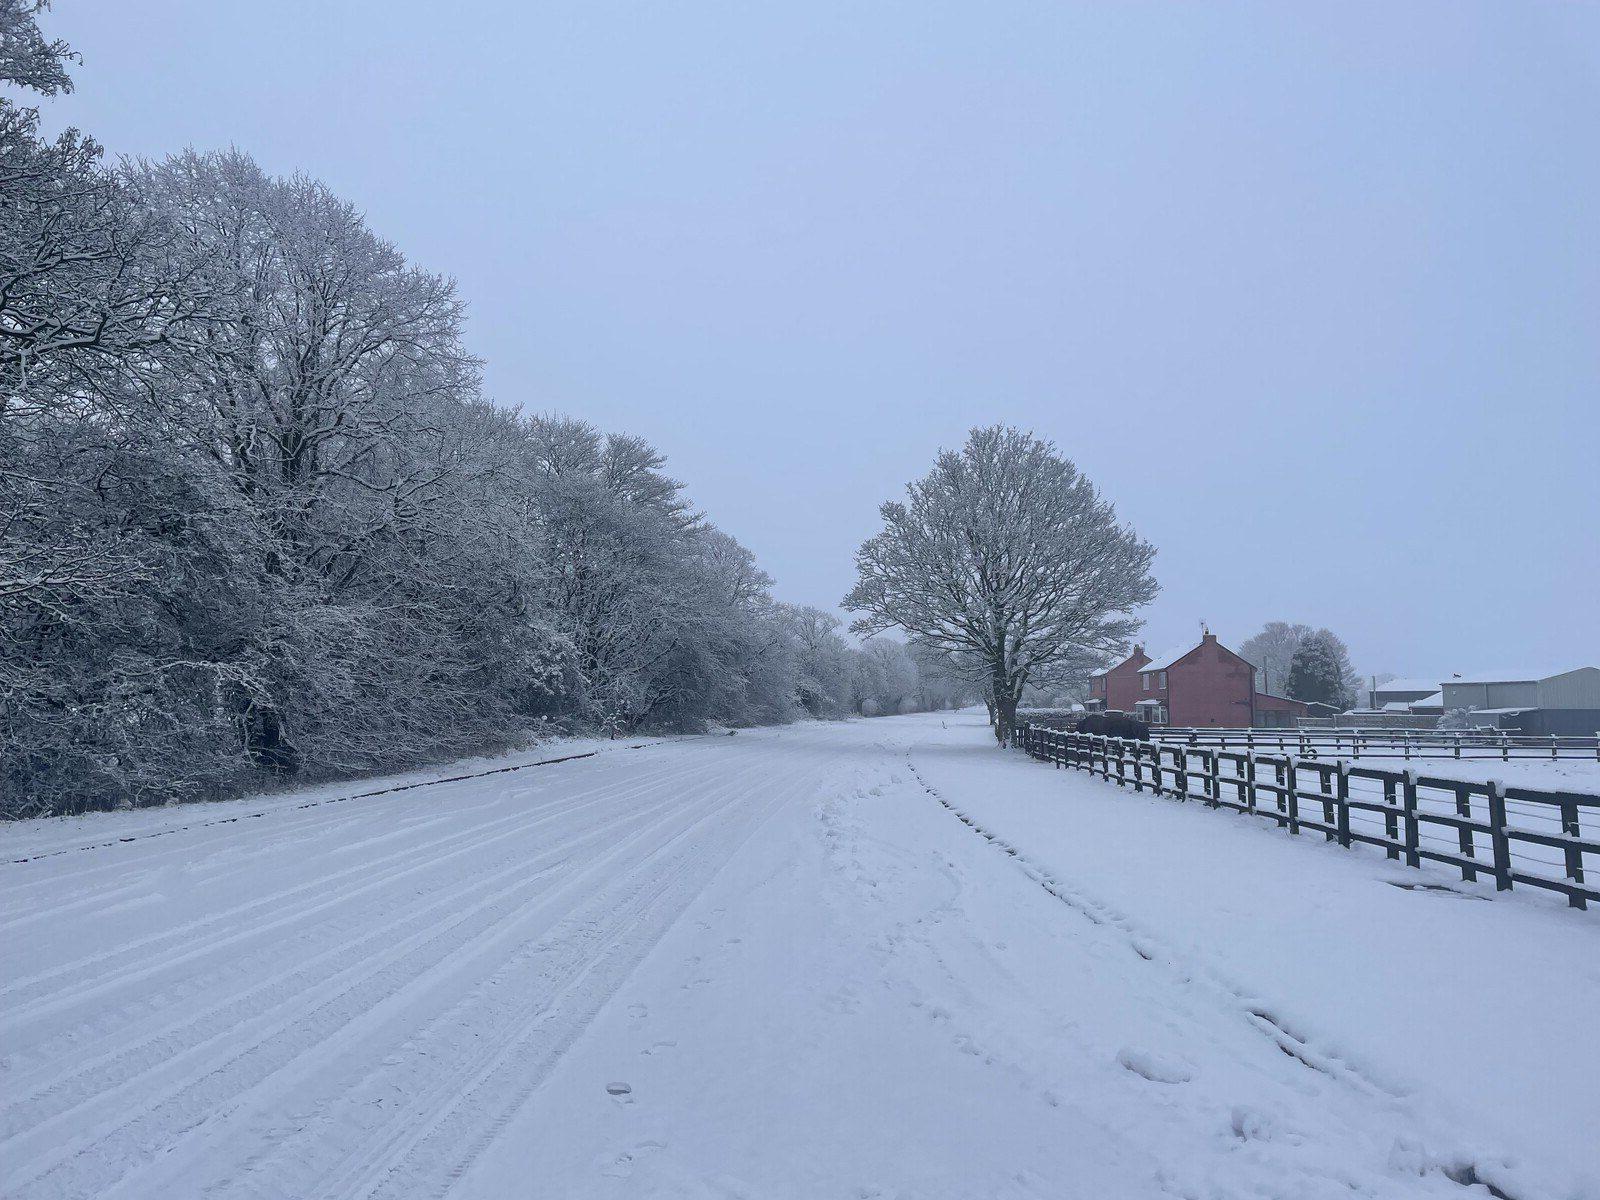 A broad snowy road with a forest on the left, an old brick house behind a wooden fence on the right